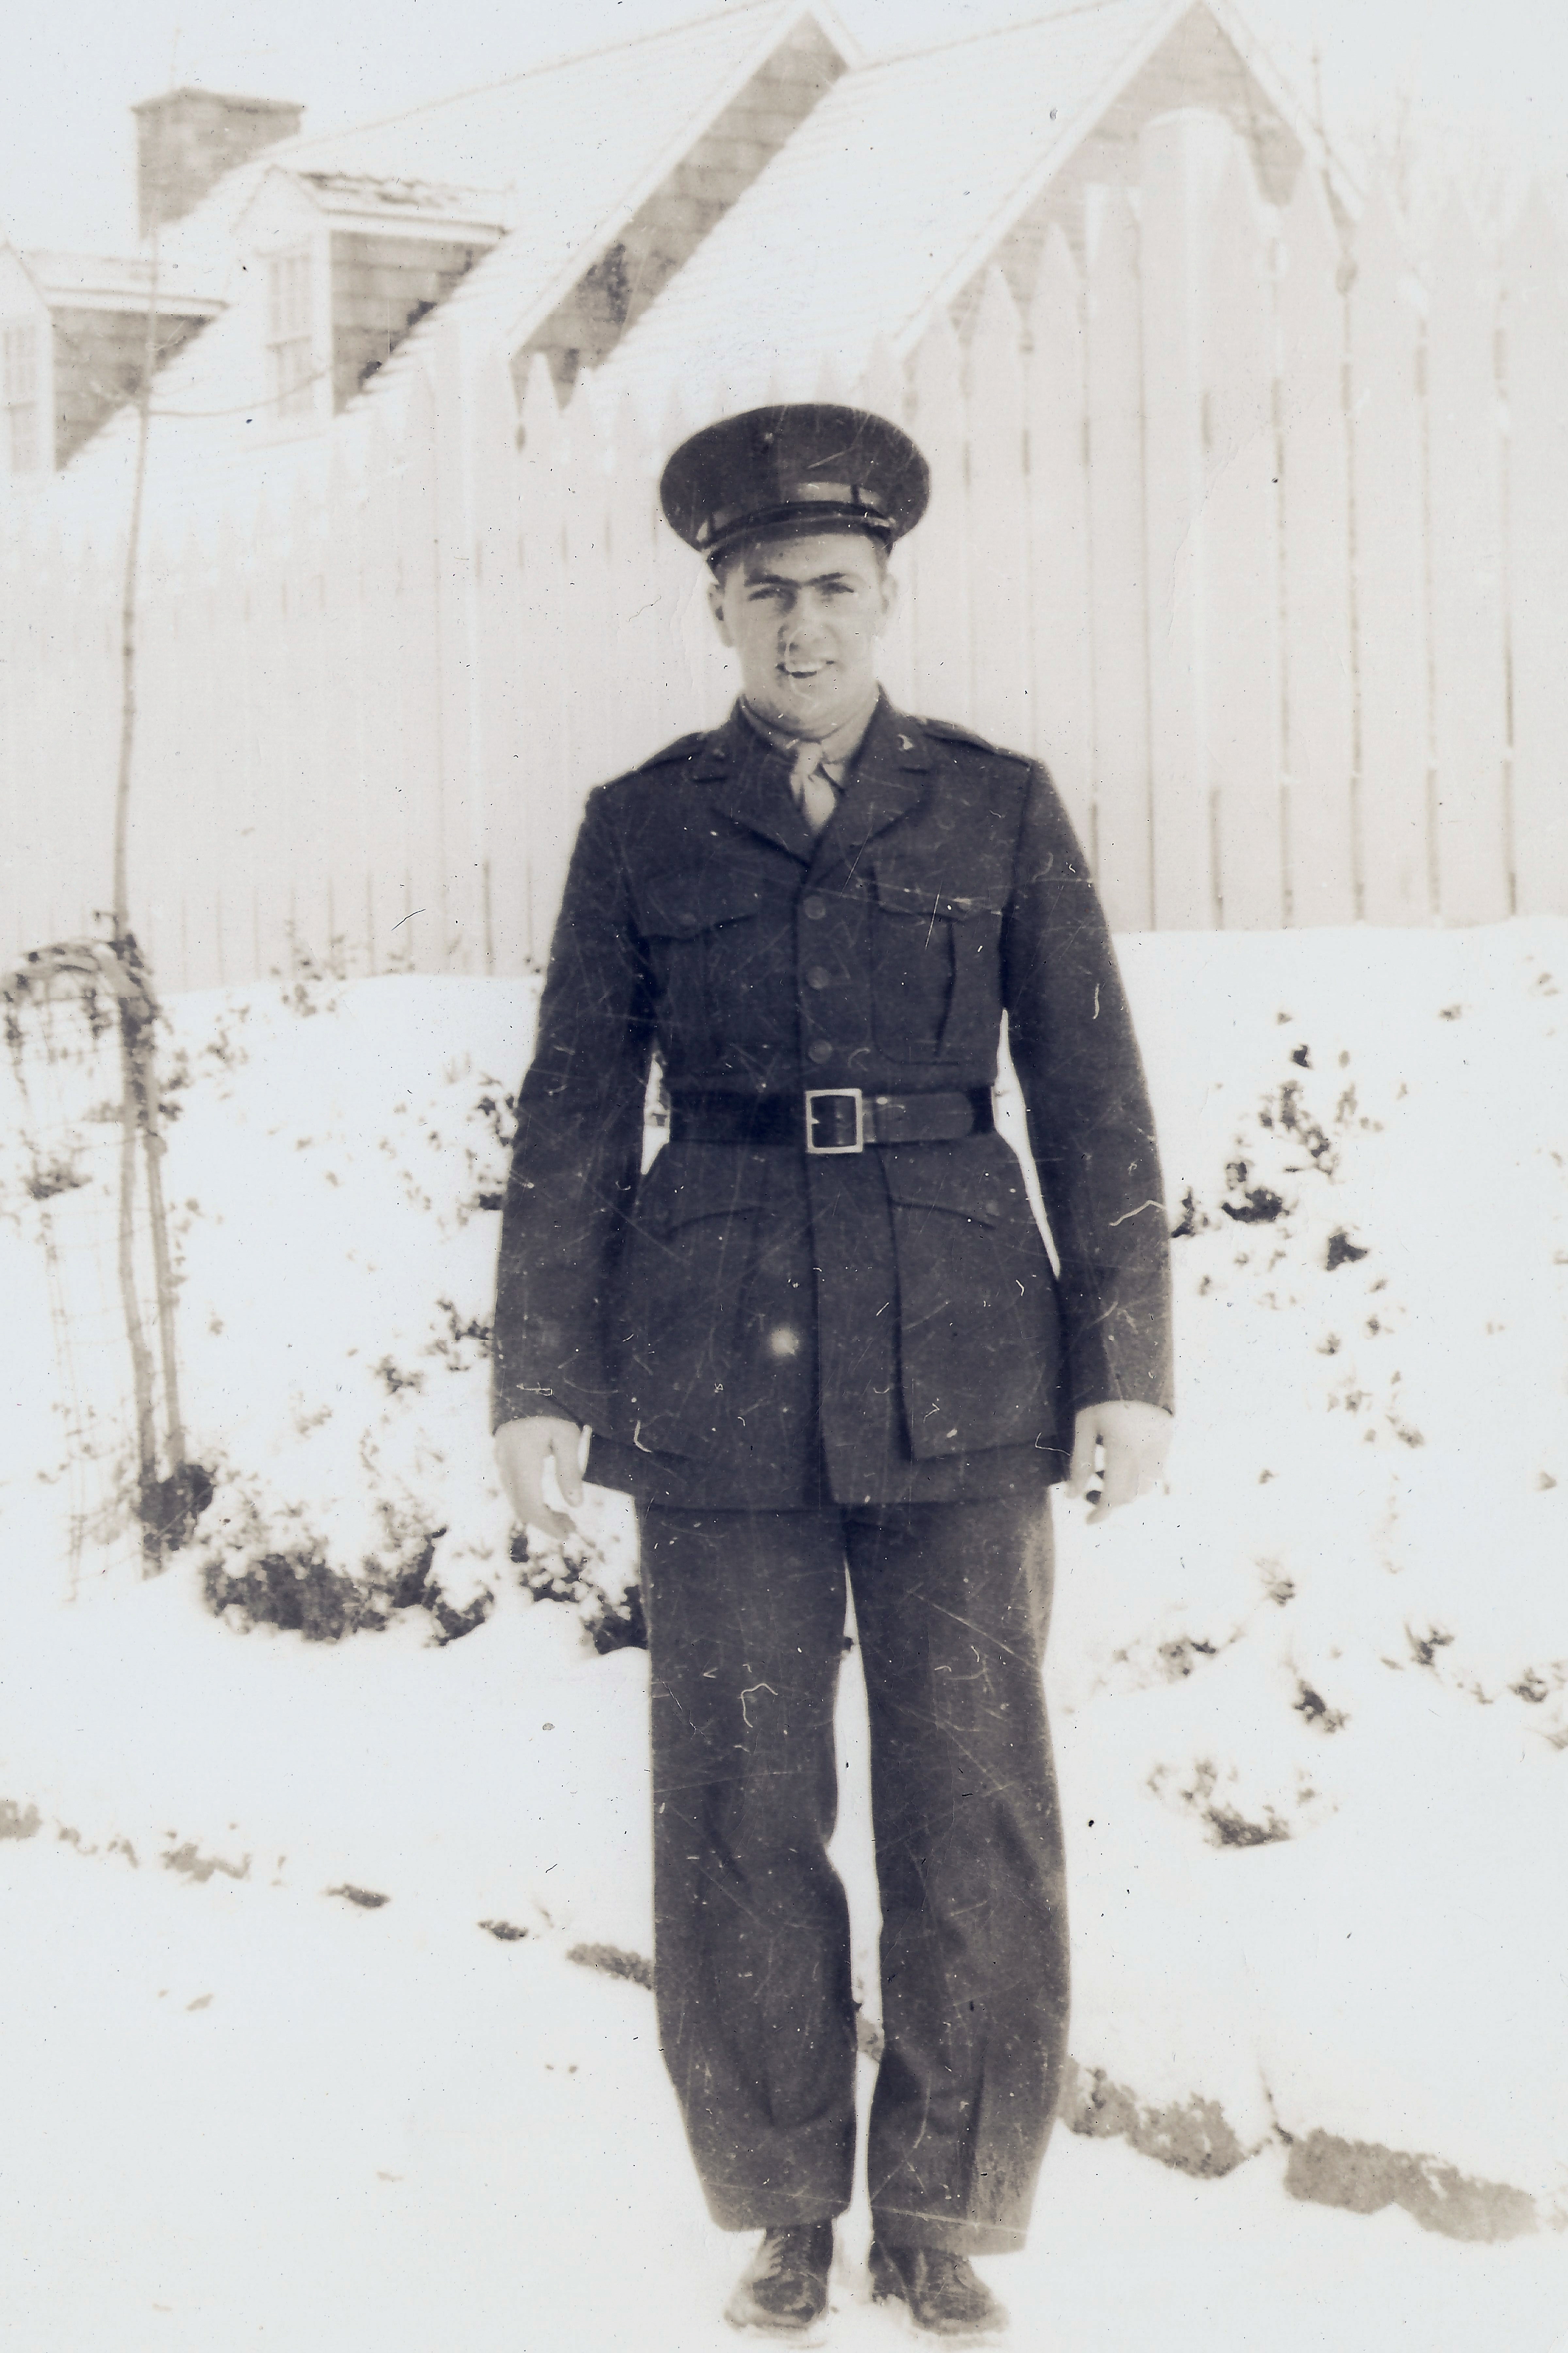 Private Dull in his dress greens, probably on "boot leave" in the winter of 1942-1943. Photo from Ancestry.com.